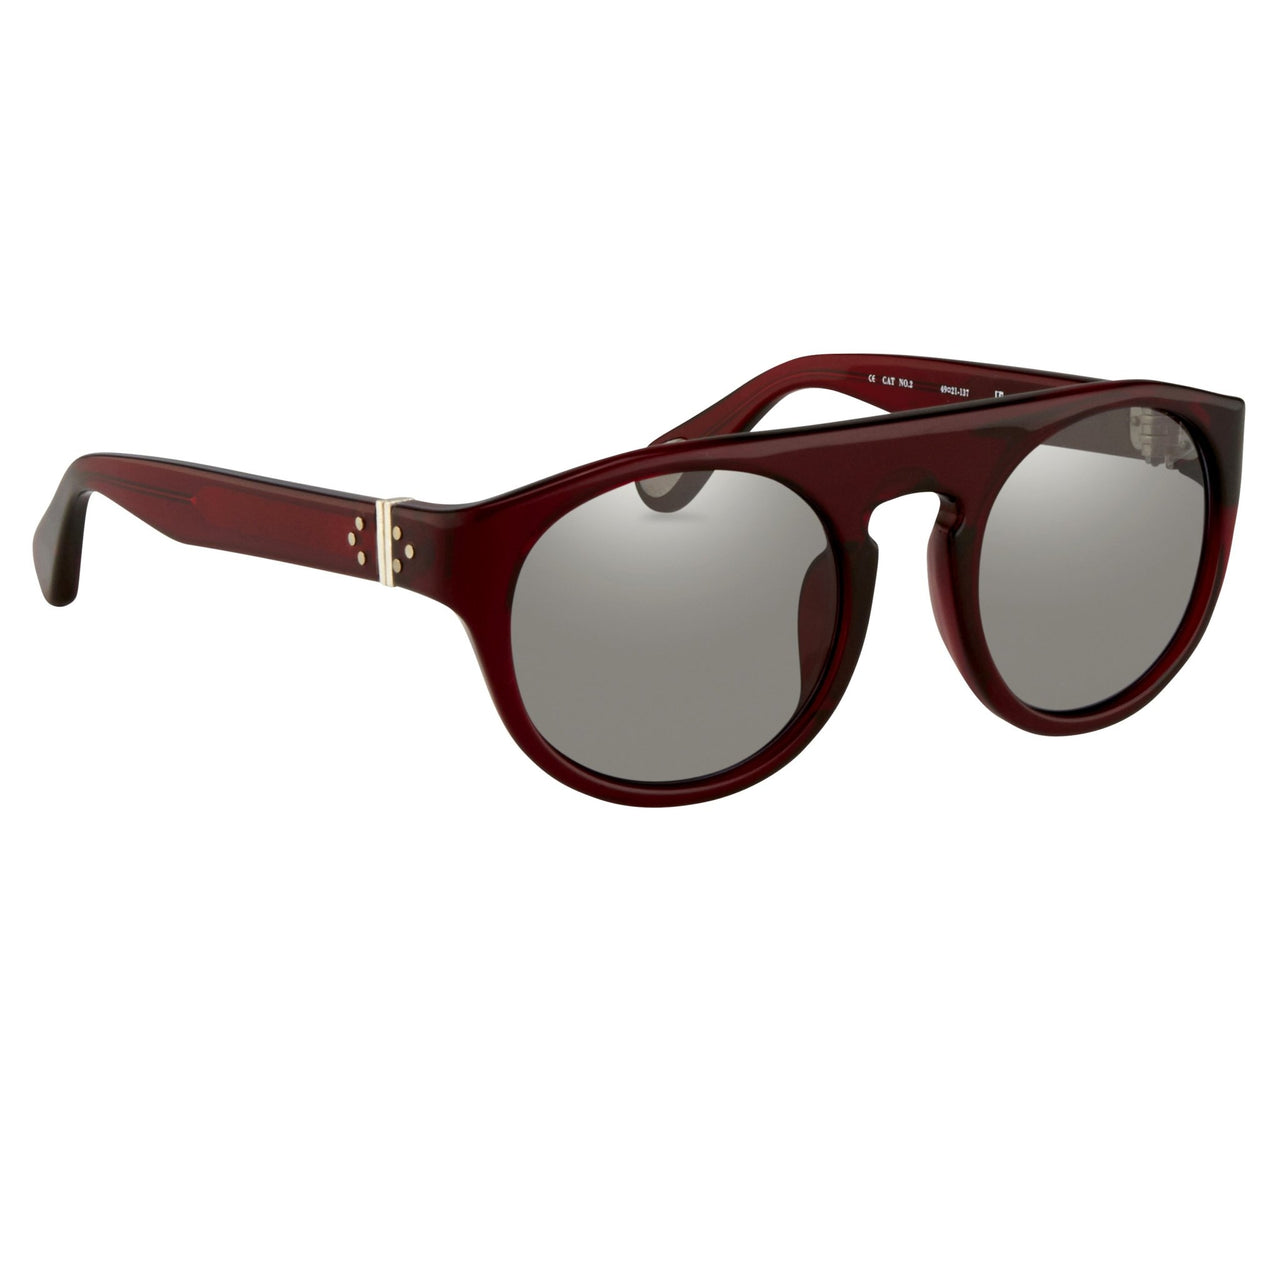 Ann Demeulemeester Sunglasses Flat Top Bordeaux Red 925 Silver with Blue Lenses Category 2 AD10C3SUN - Watches & Crystals